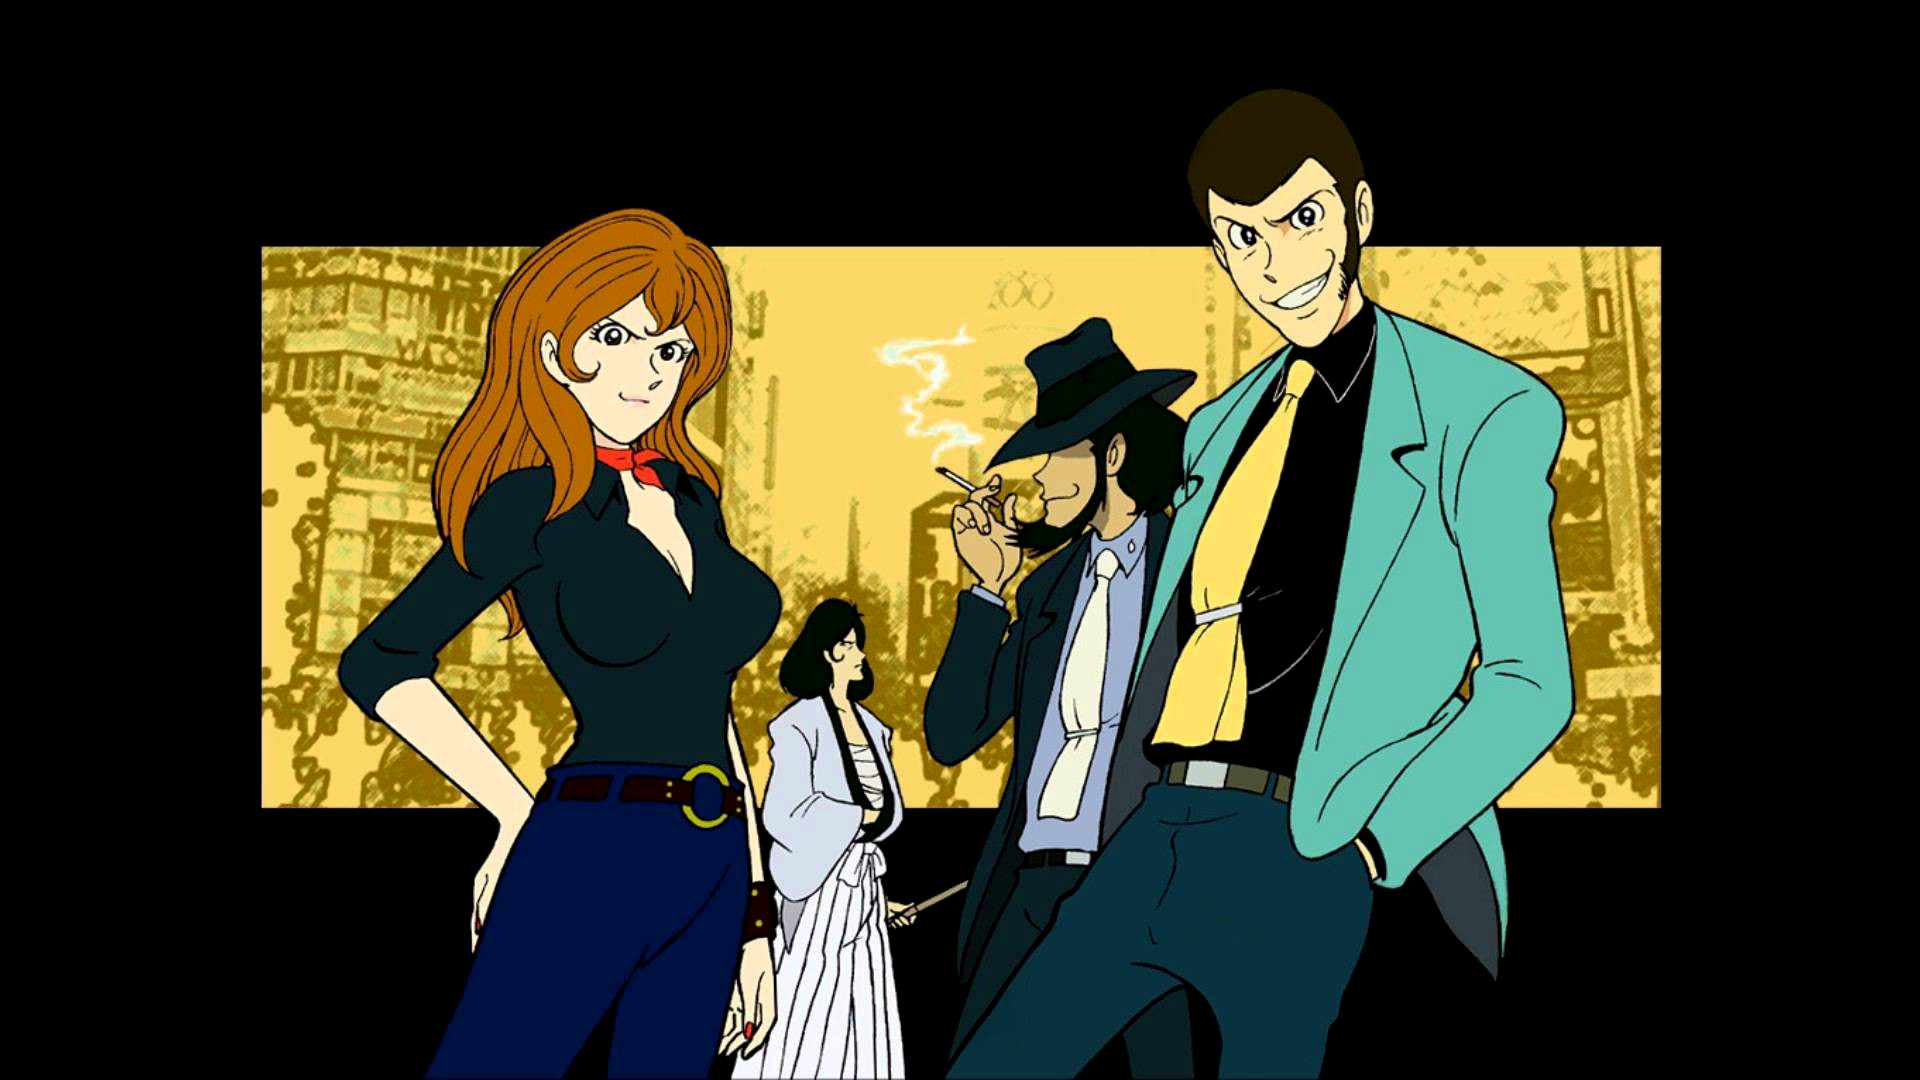 anime, lupin the third